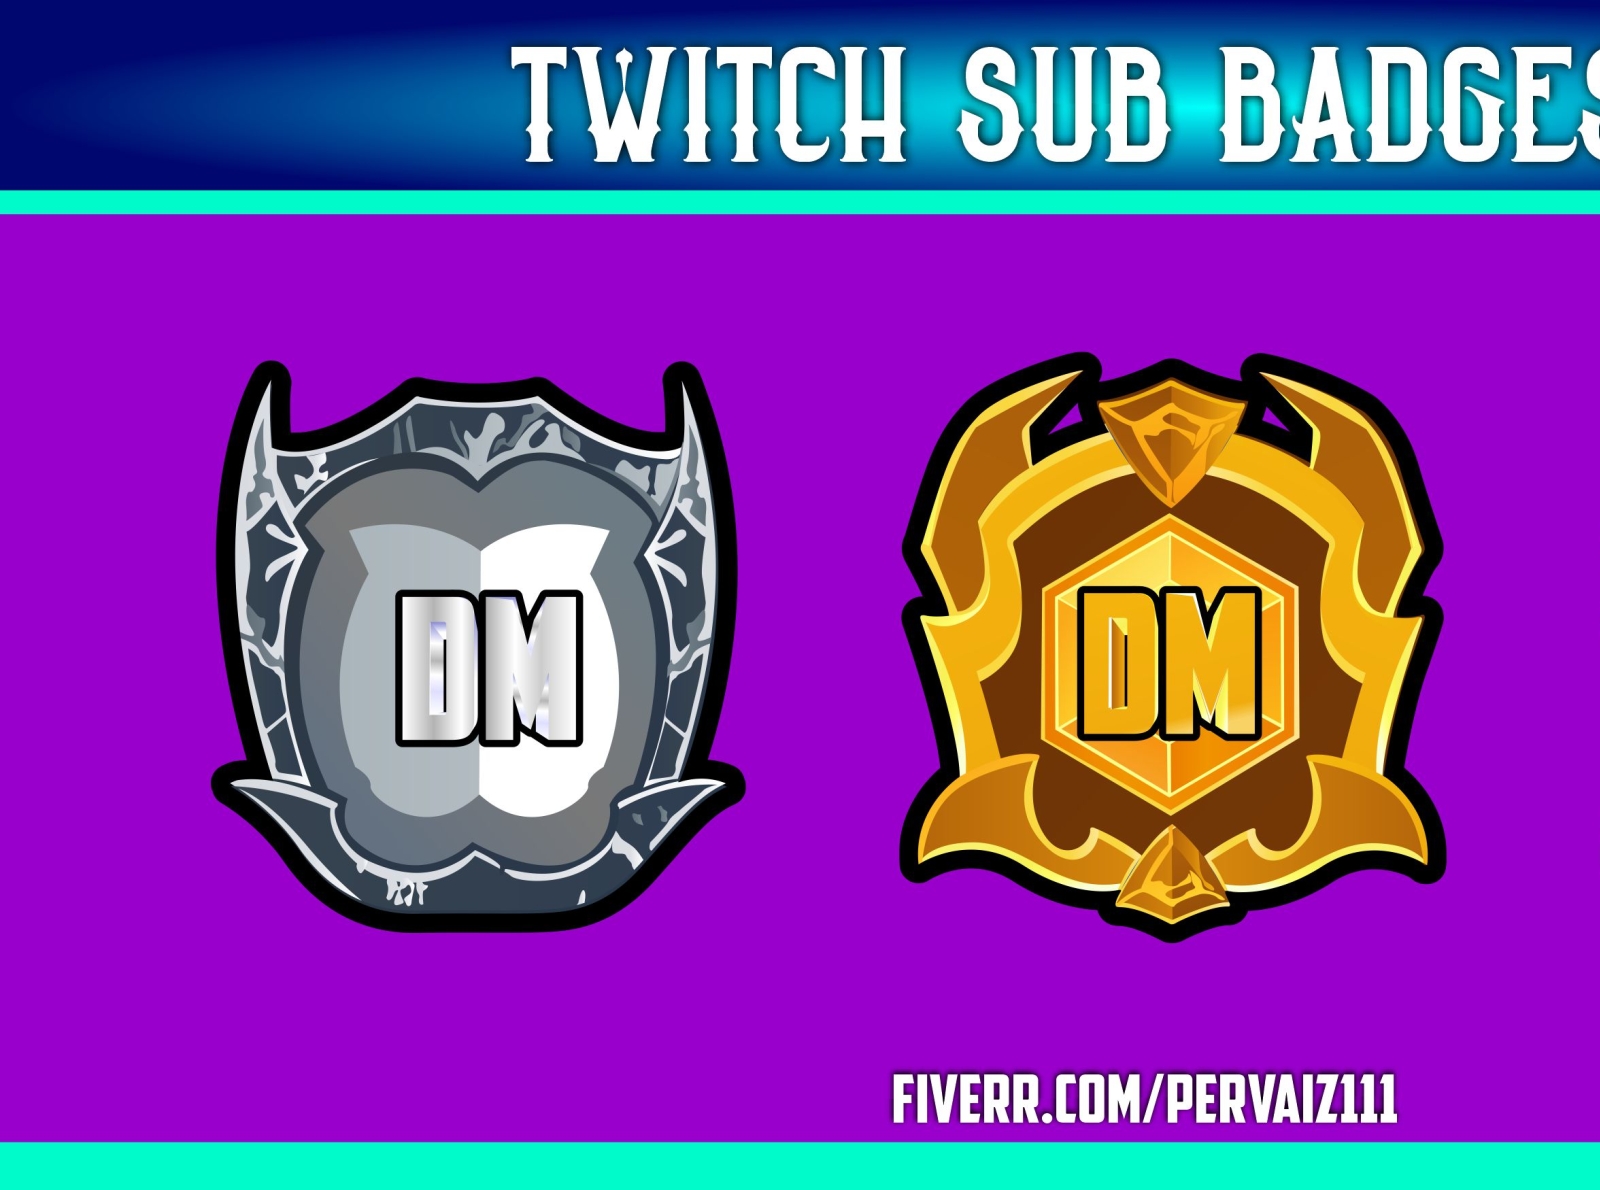 Twitch subs. Badges Твич. Sub badges. Twitch sub badges. Star sub badges for twitch.